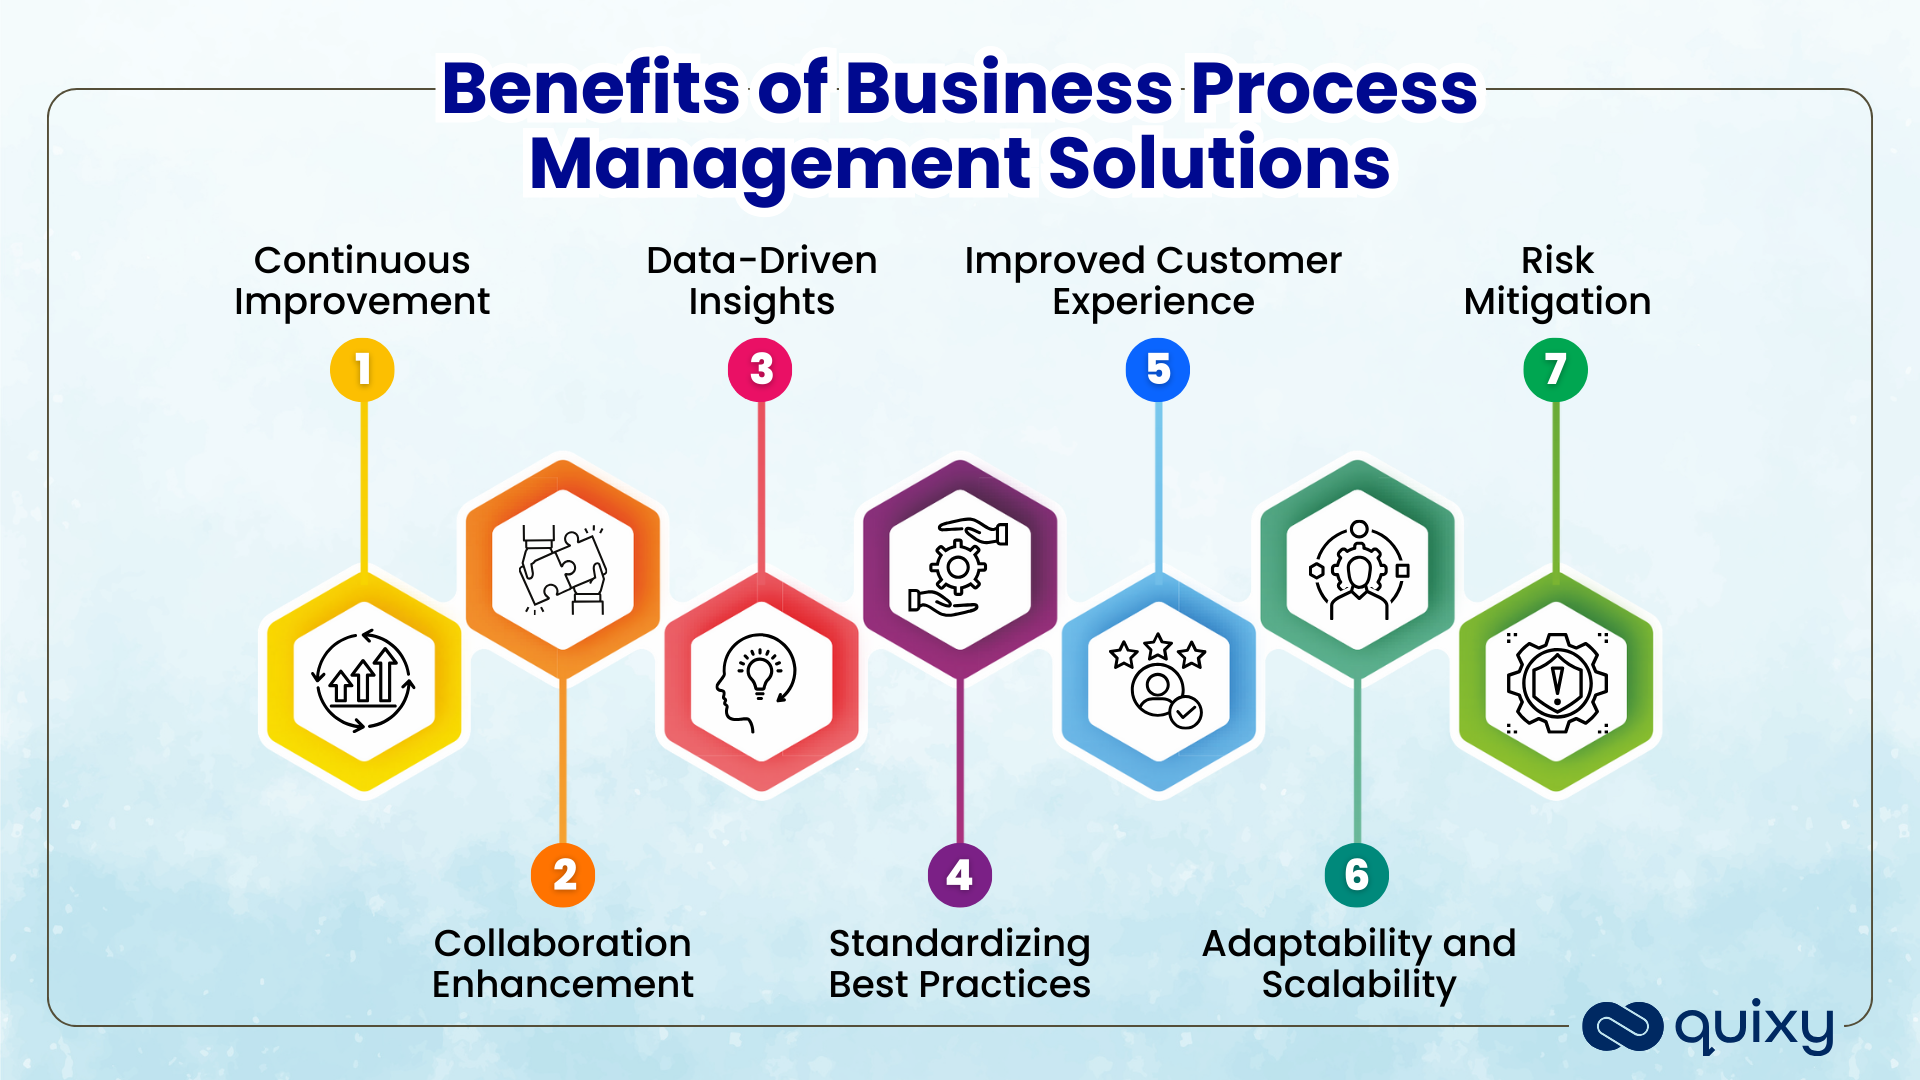 Benefits of Business Process Management Solutions